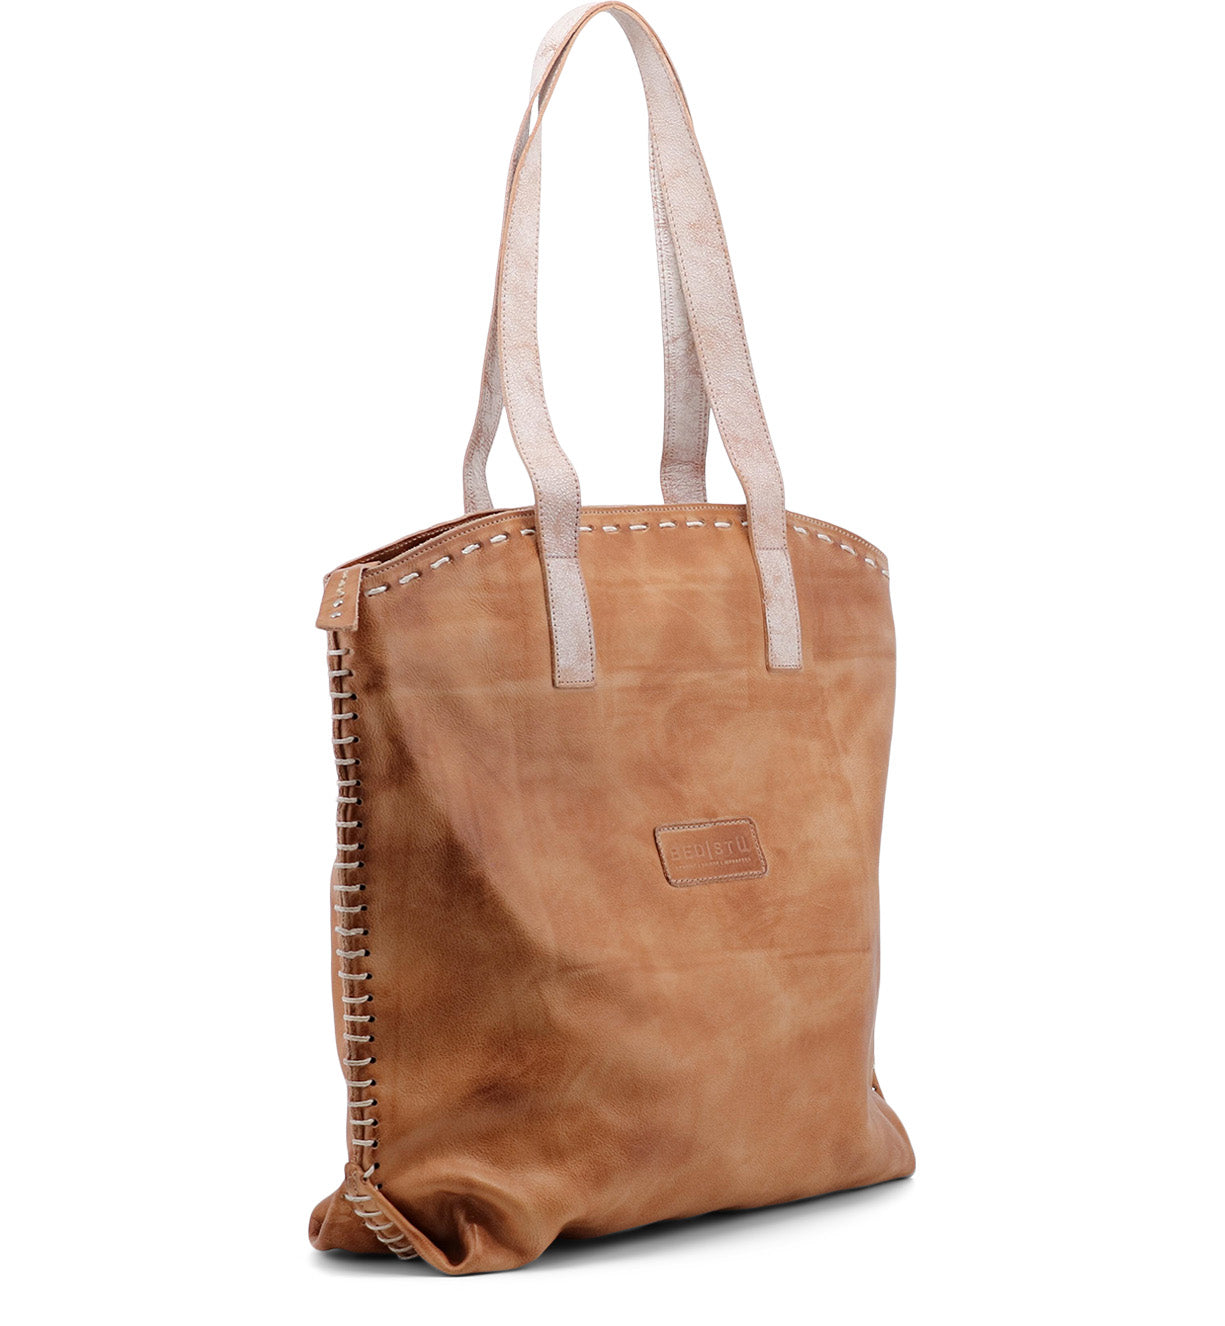 A Skye II tan leather tote bag with rivets by Bed Stu.